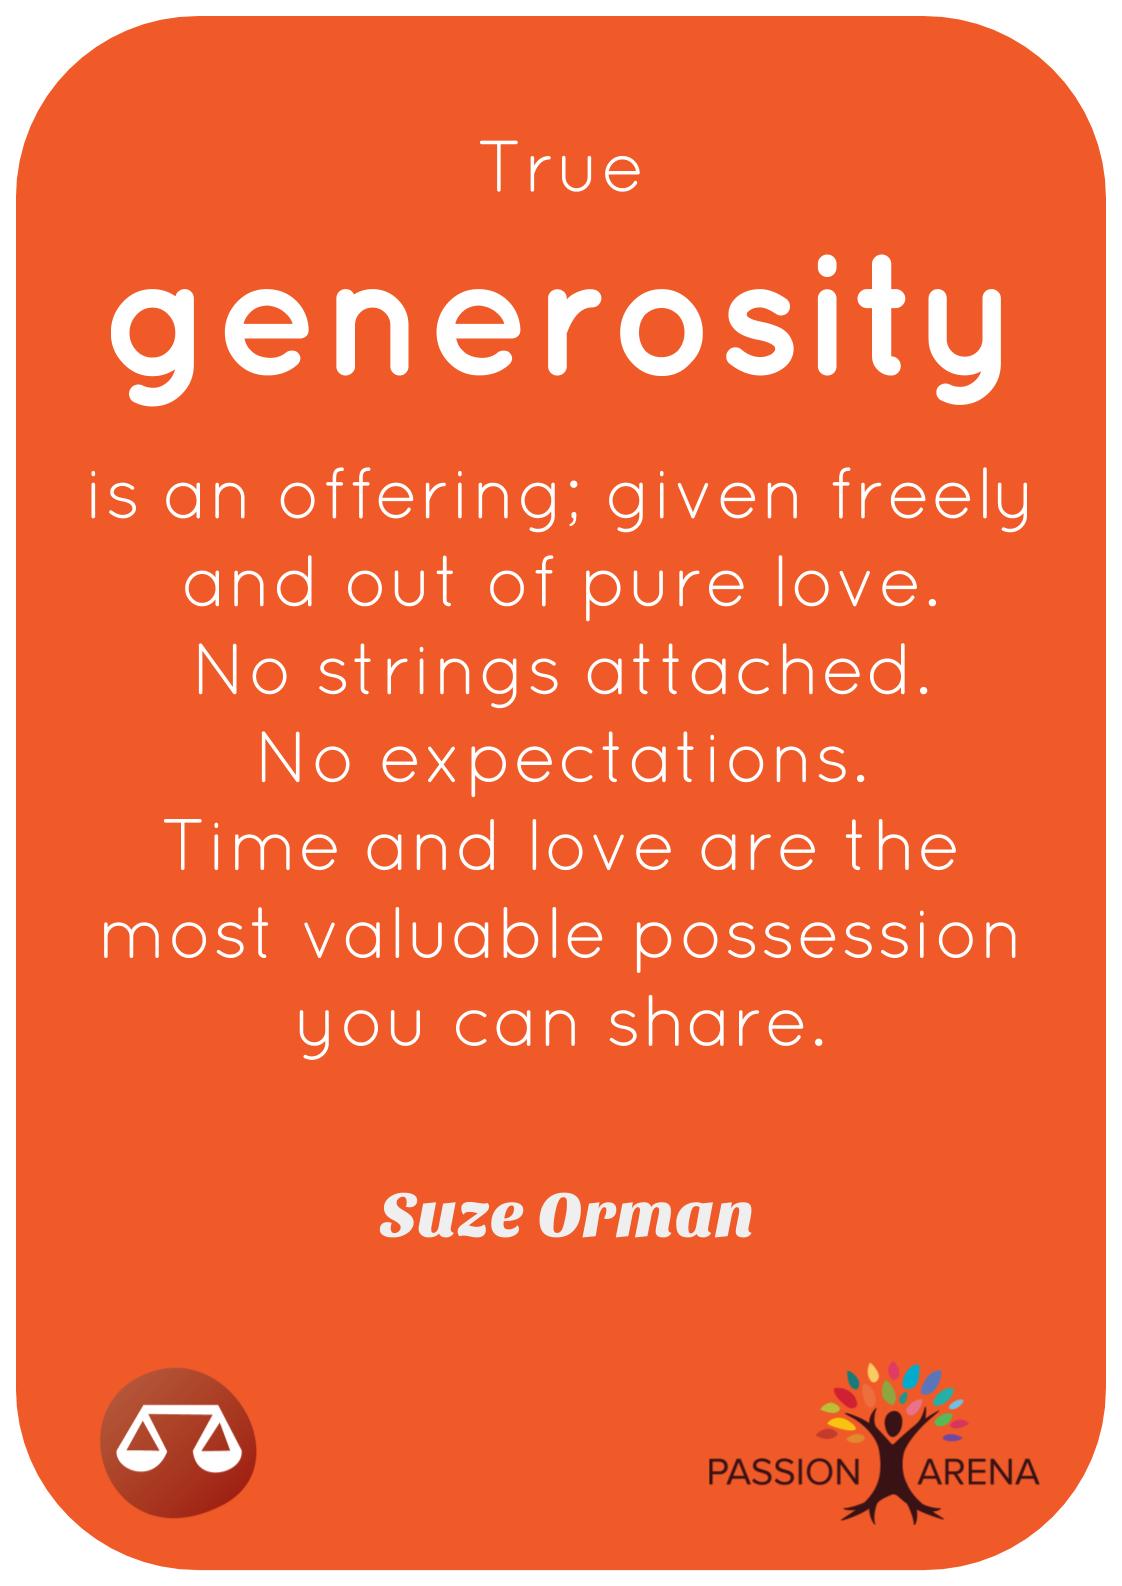 Intro-3-39. What does a generous person look like?